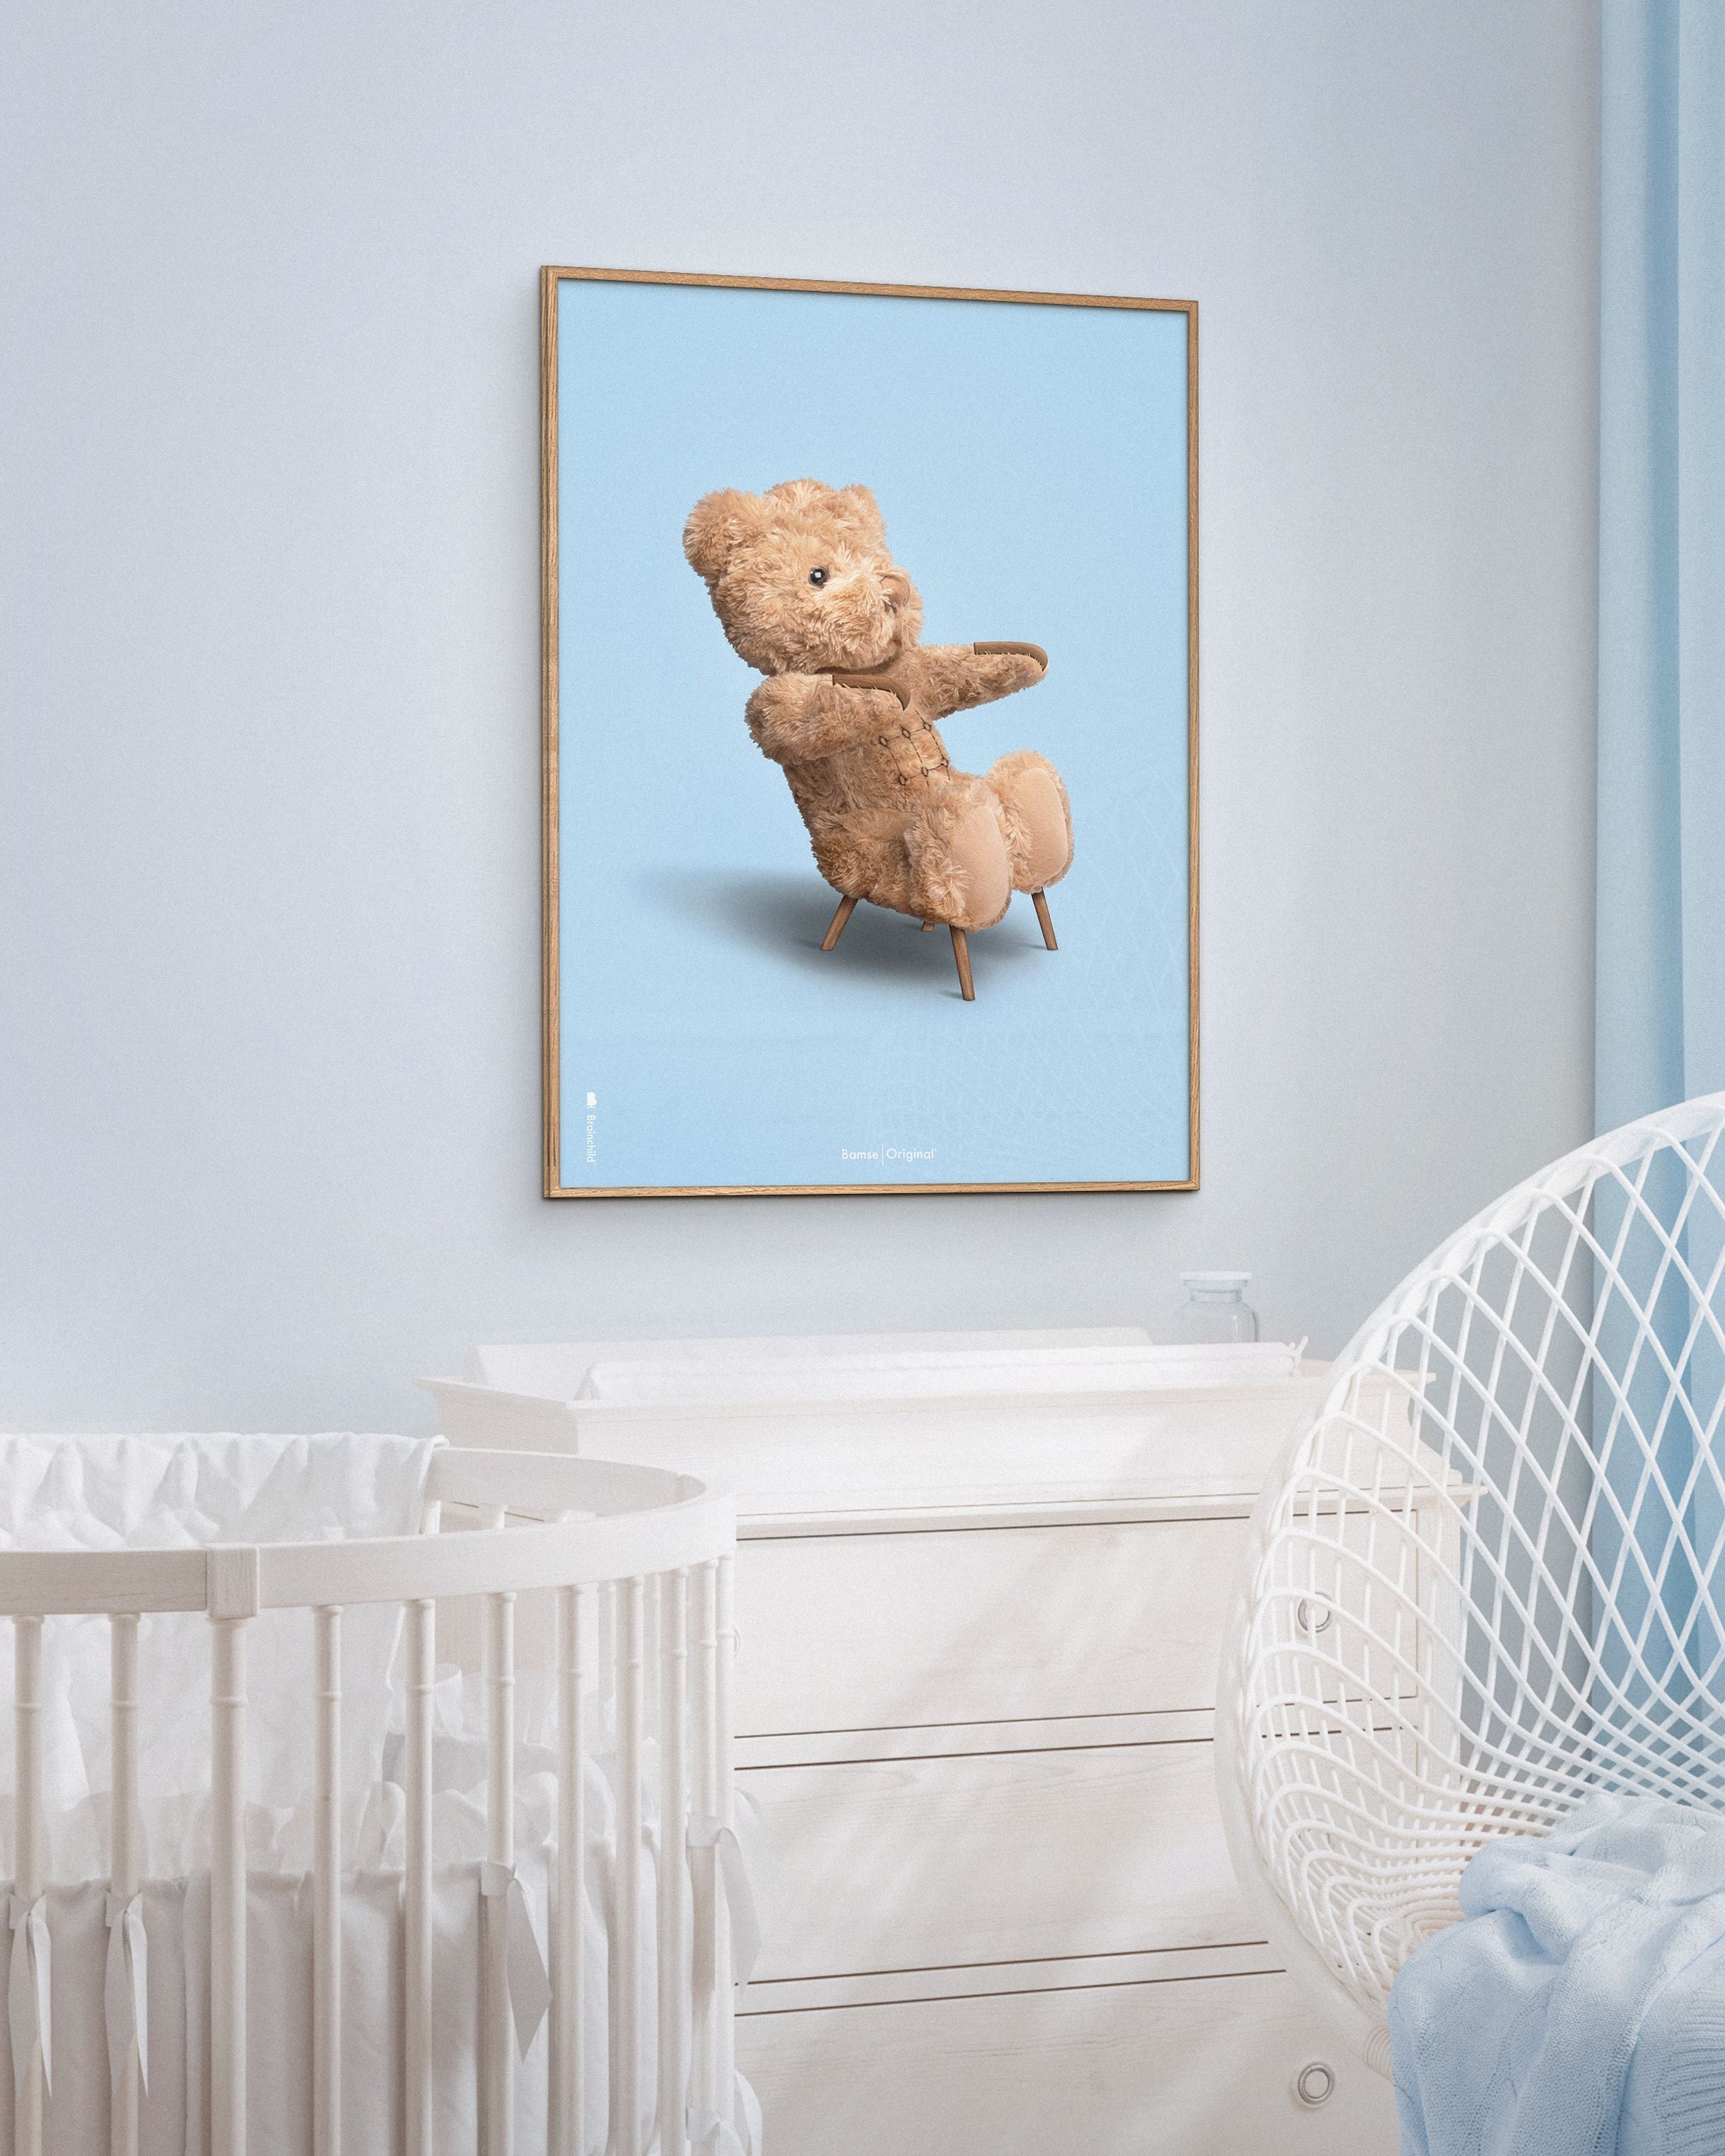 Brainchild Teddy Bear Classic Poster Without Frame 50x70 Cm, Light Blue Background